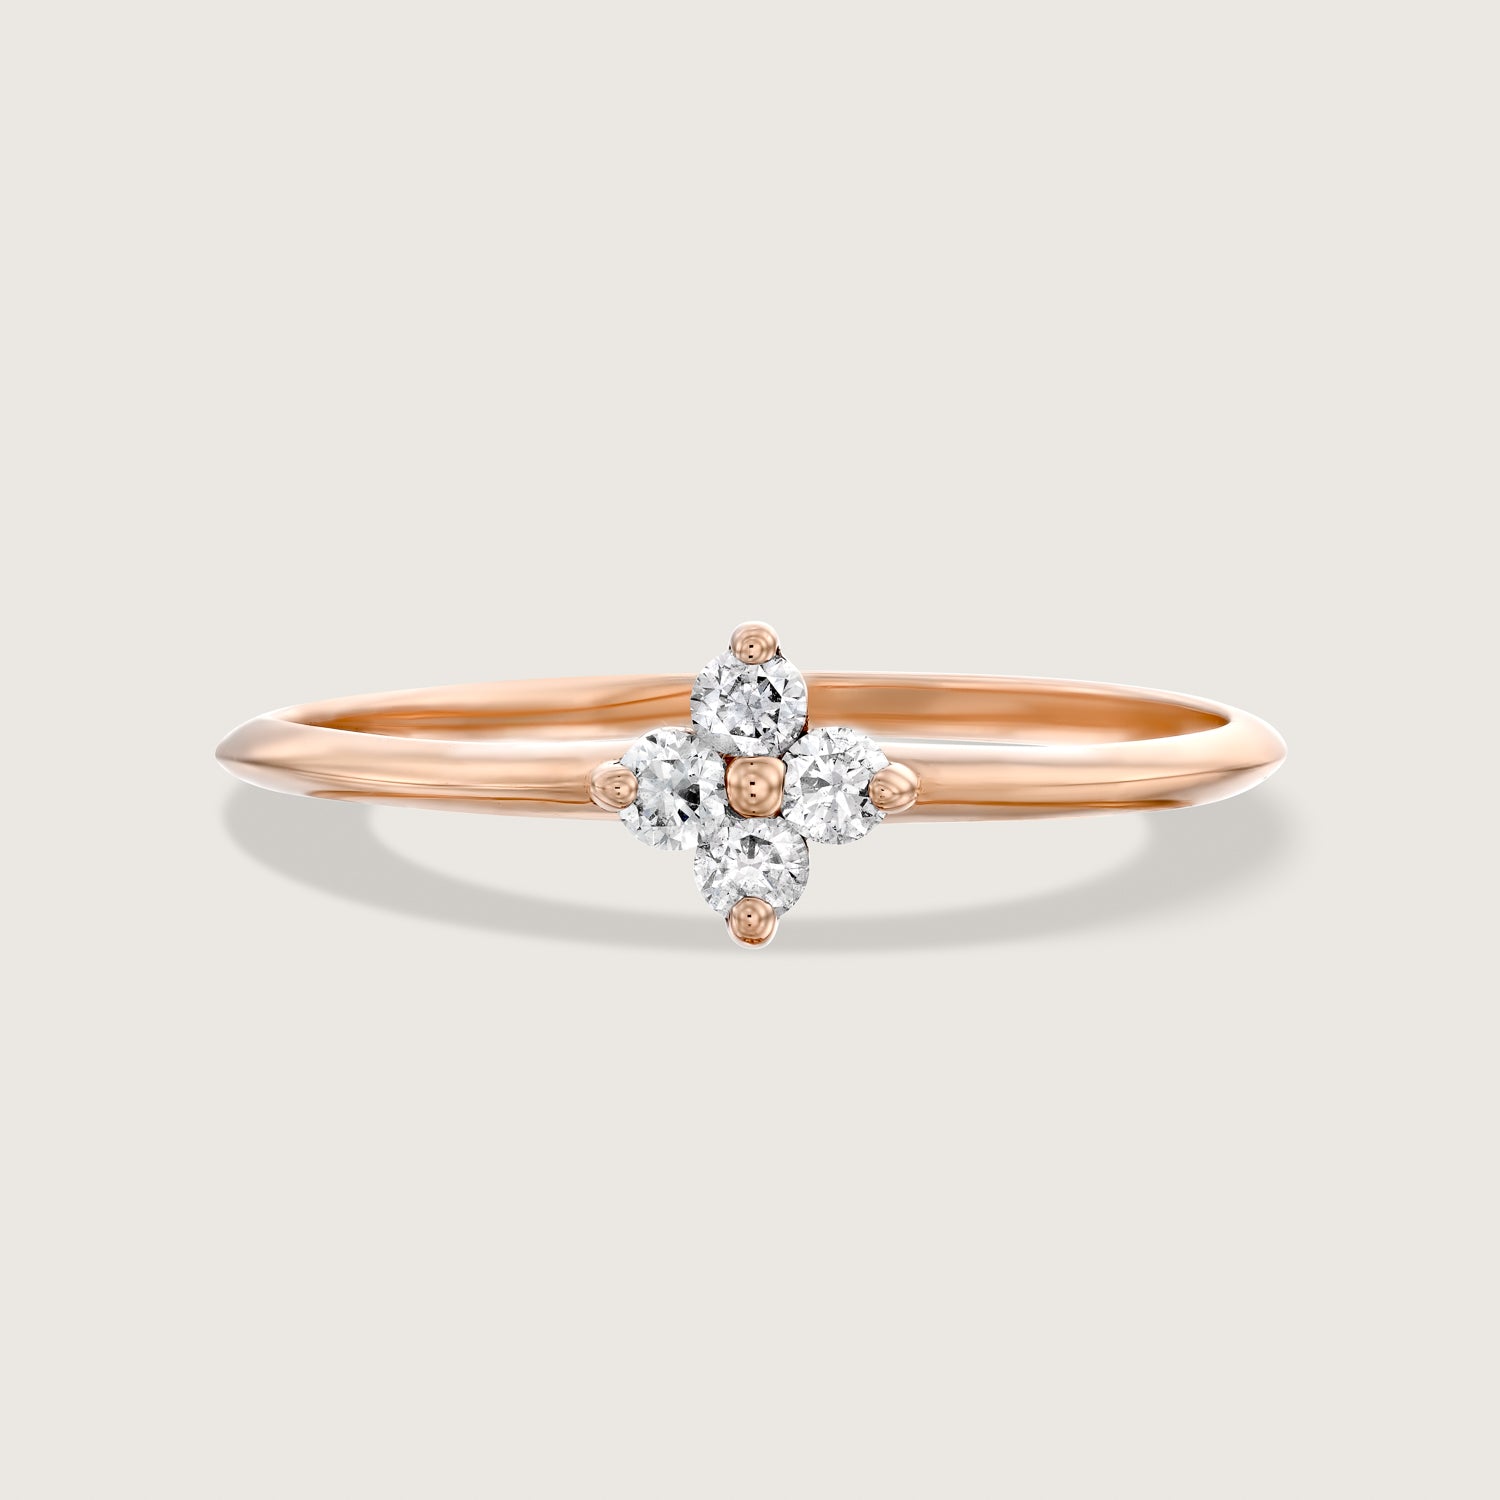 Beth Gold Ring With White Diamonds